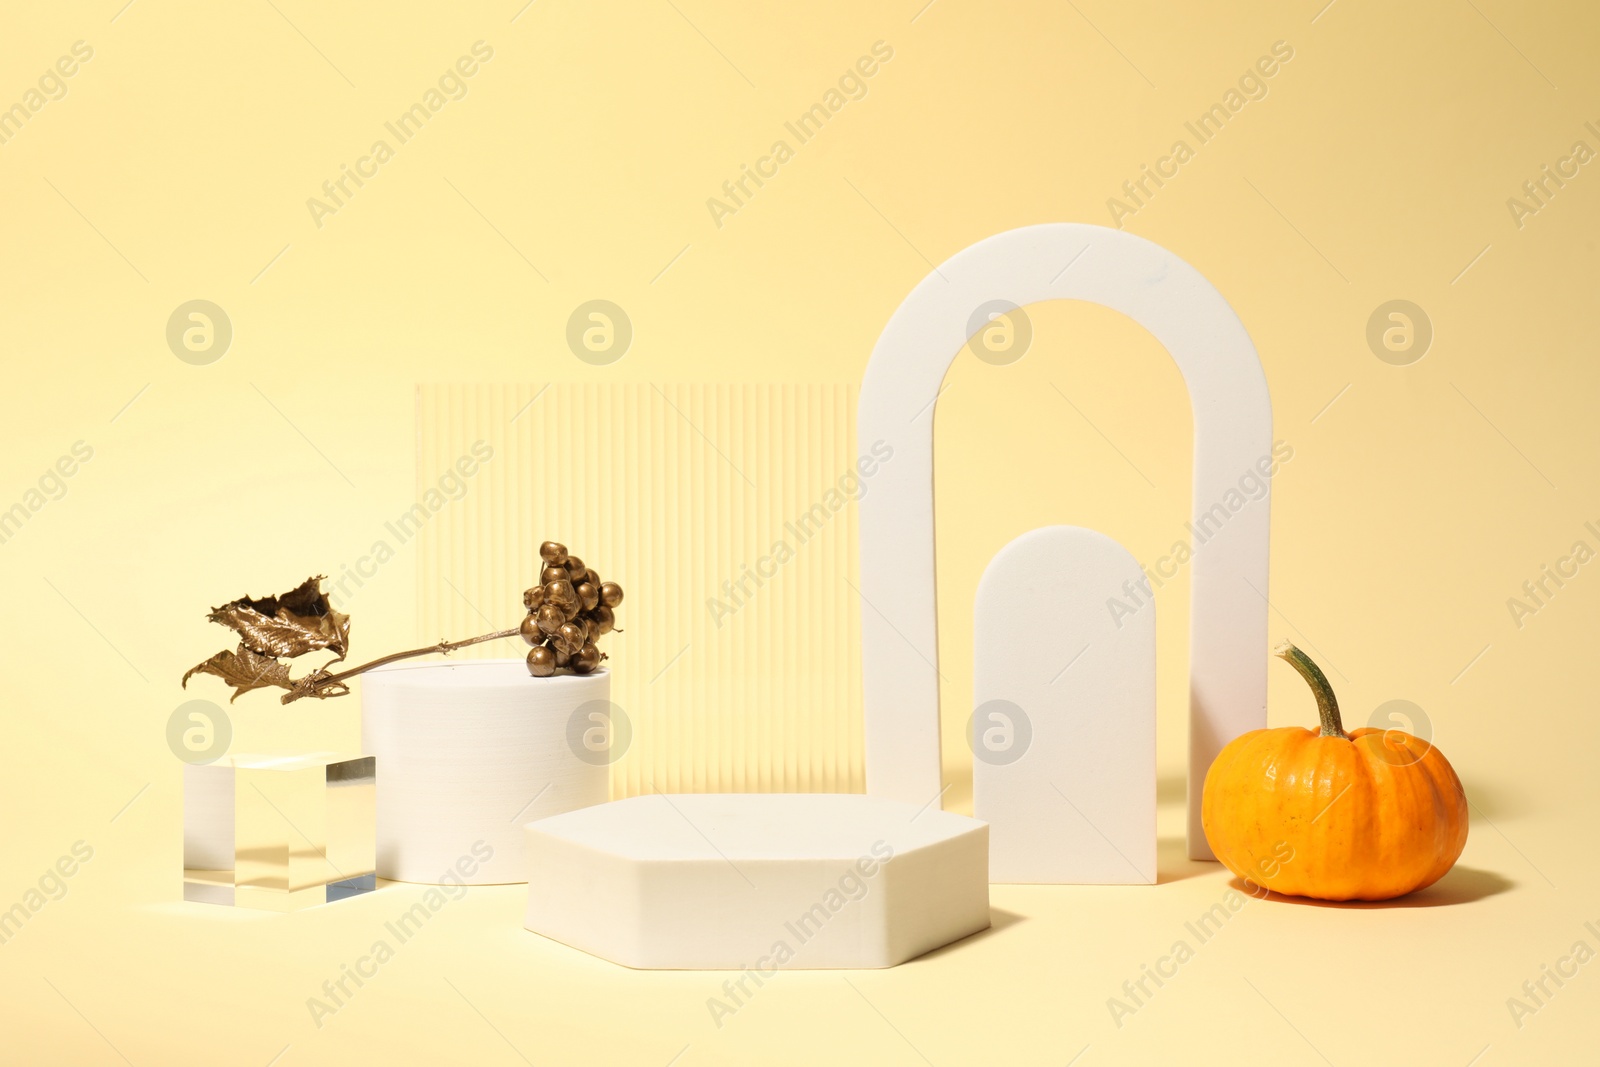 Photo of Autumn presentation for product. Geometric figures and decorative elements on light yellow background